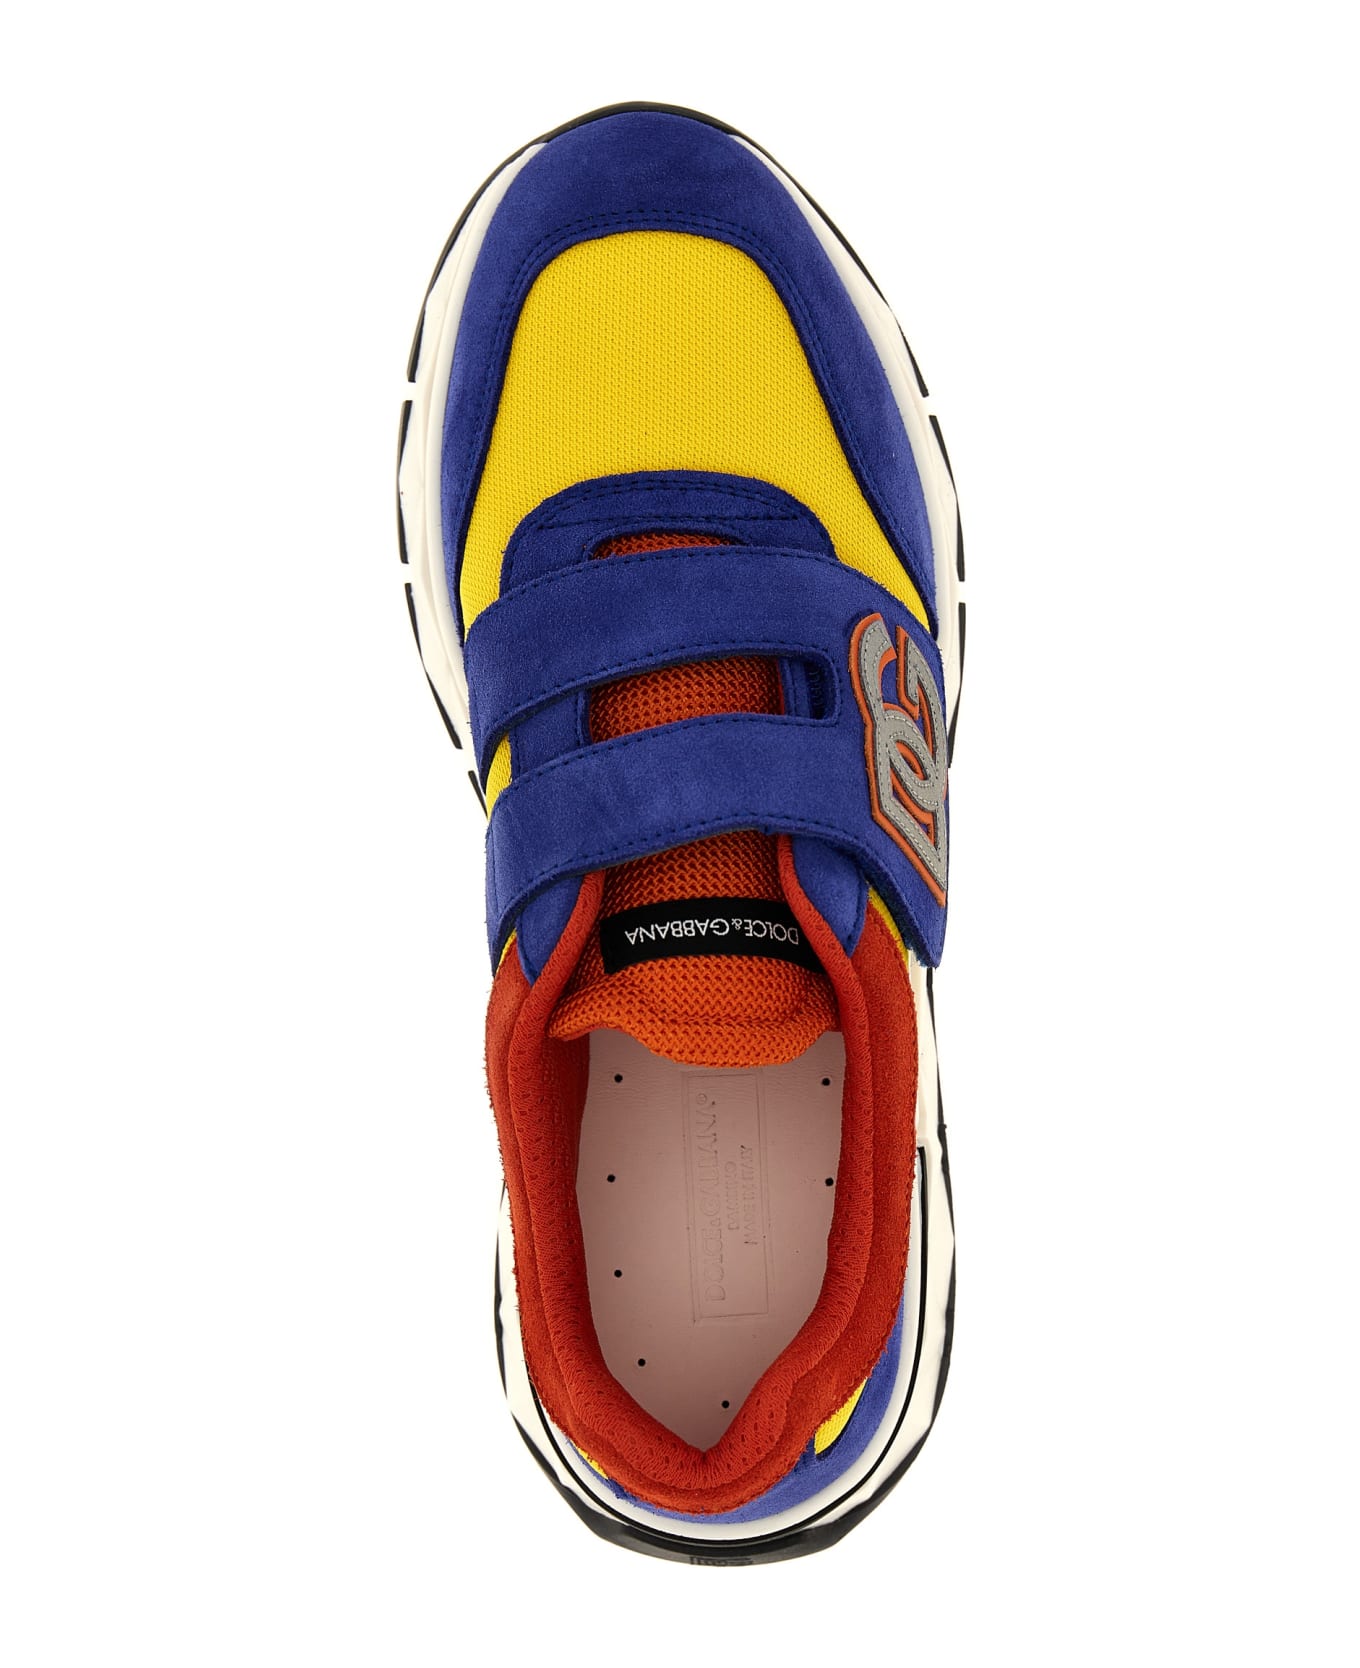 Dolce & Gabbana 'surf Camp' Sneakers - Multicolor